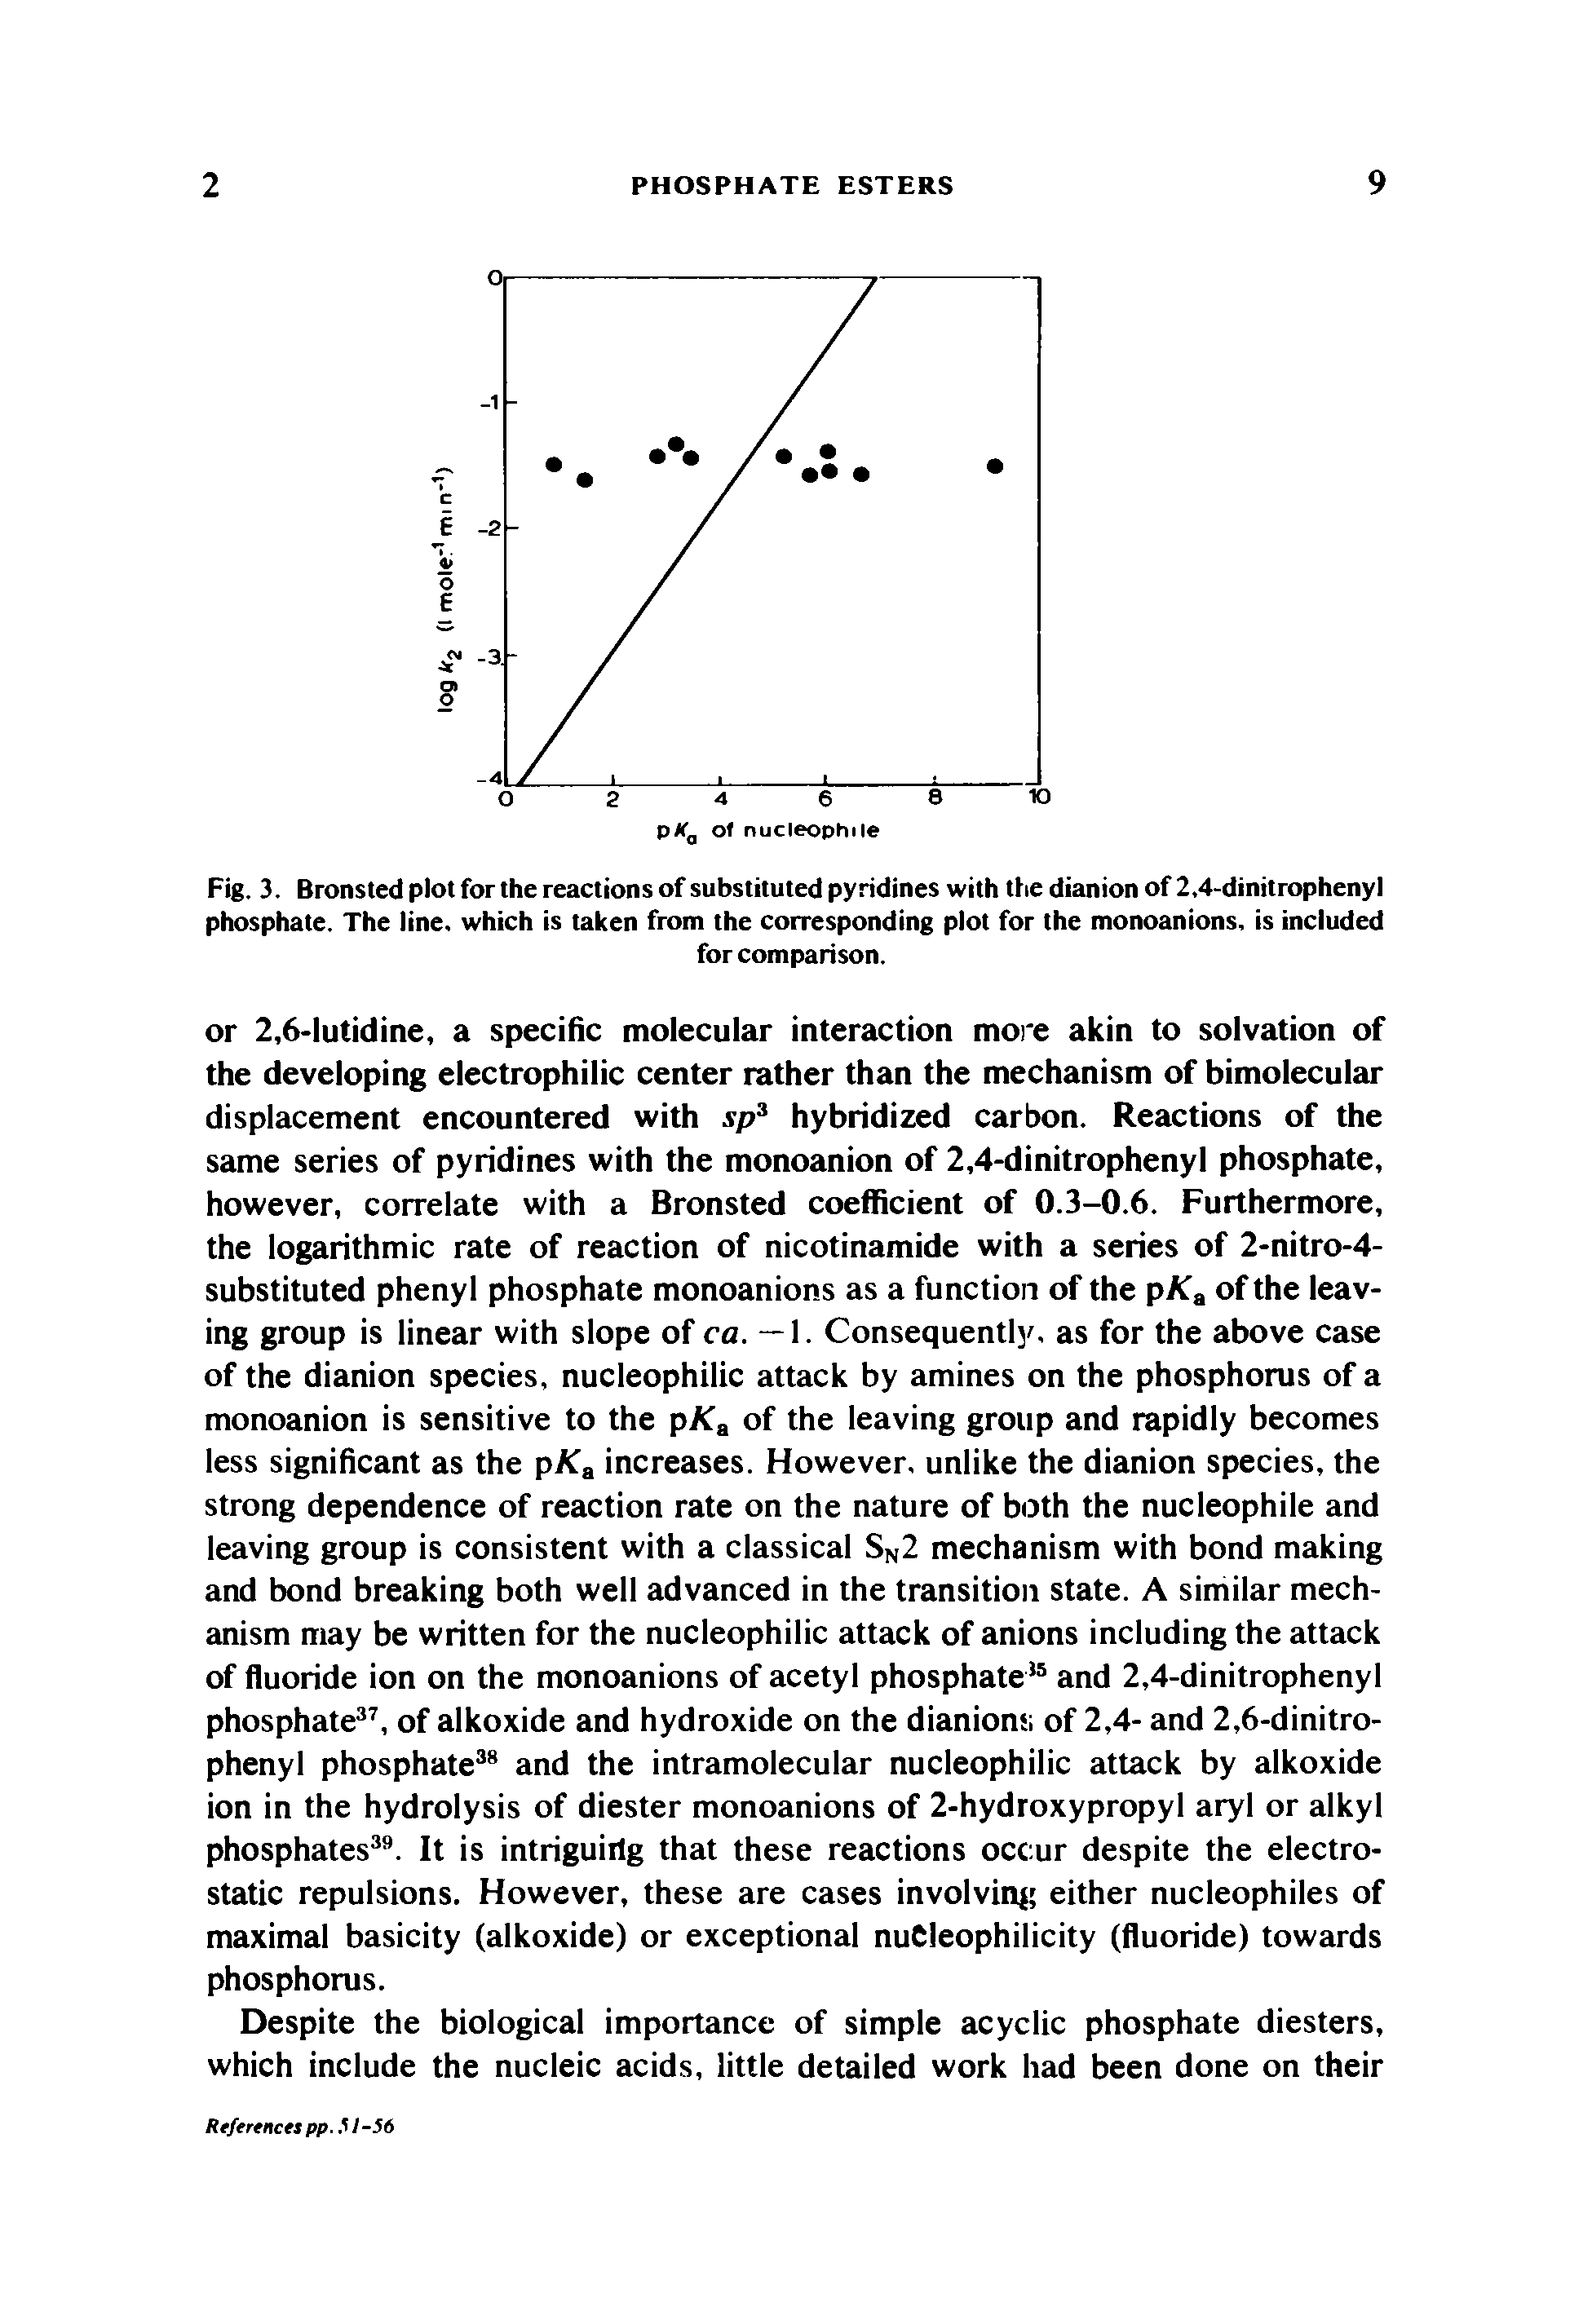 Fig. 3. Bronsted plot for the reactions of substituted pyridines with the dianion of 2.4-dinitrophenyl phosphate. The line, which is taken from the corresponding plot for the monoanions, is included...